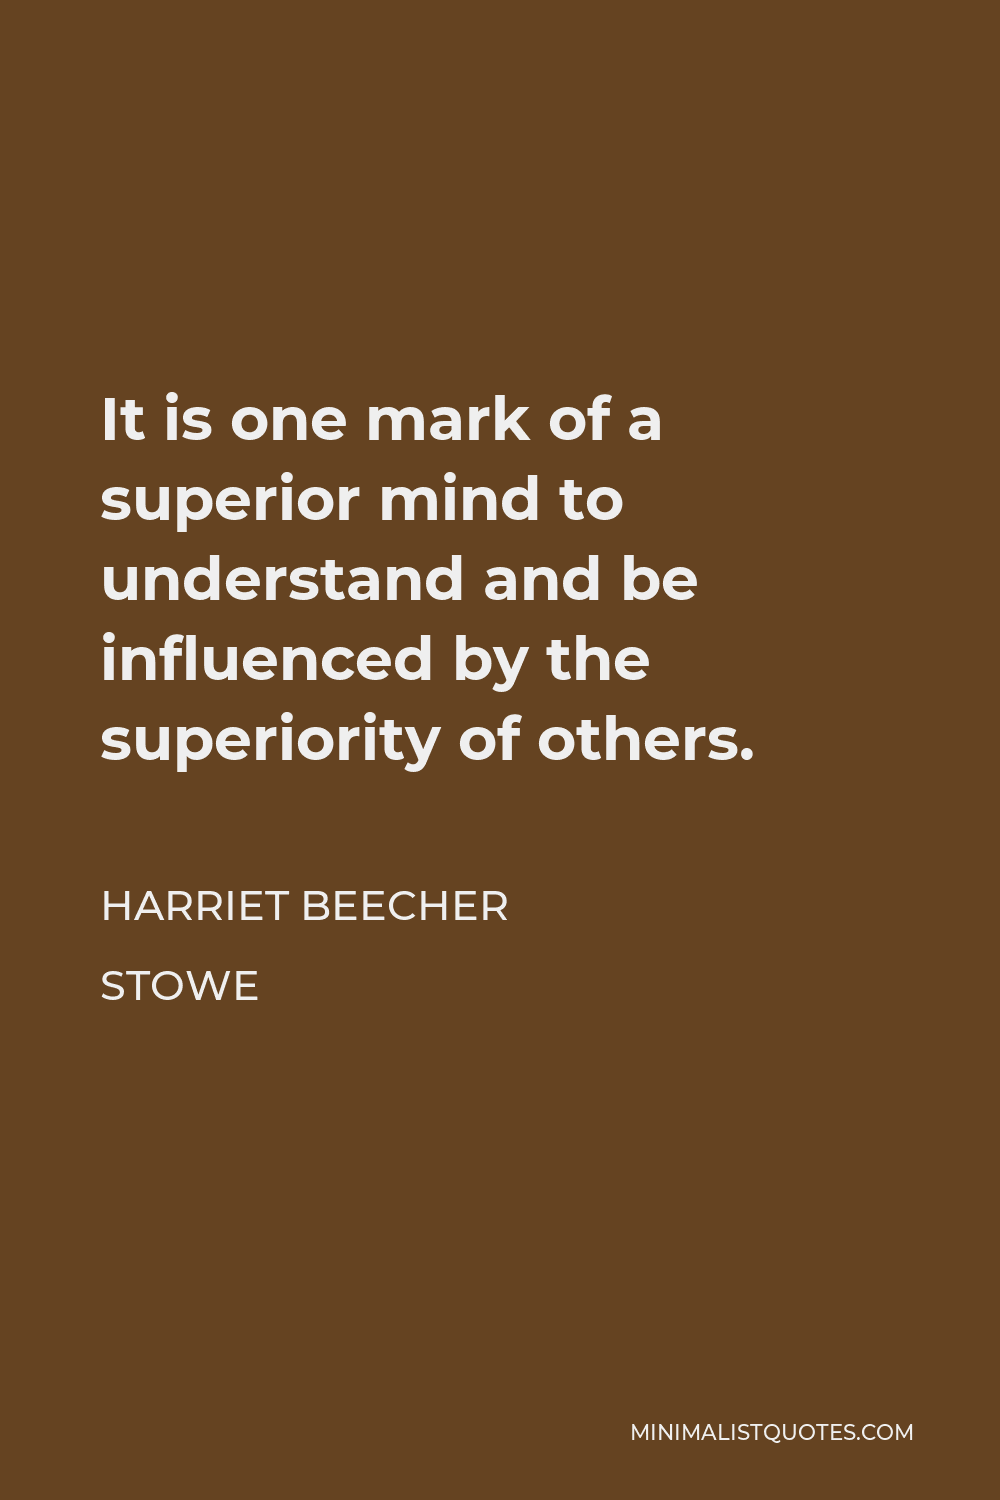 Harriet Beecher Stowe Quote - It is one mark of a superior mind to understand and be influenced by the superiority of others.